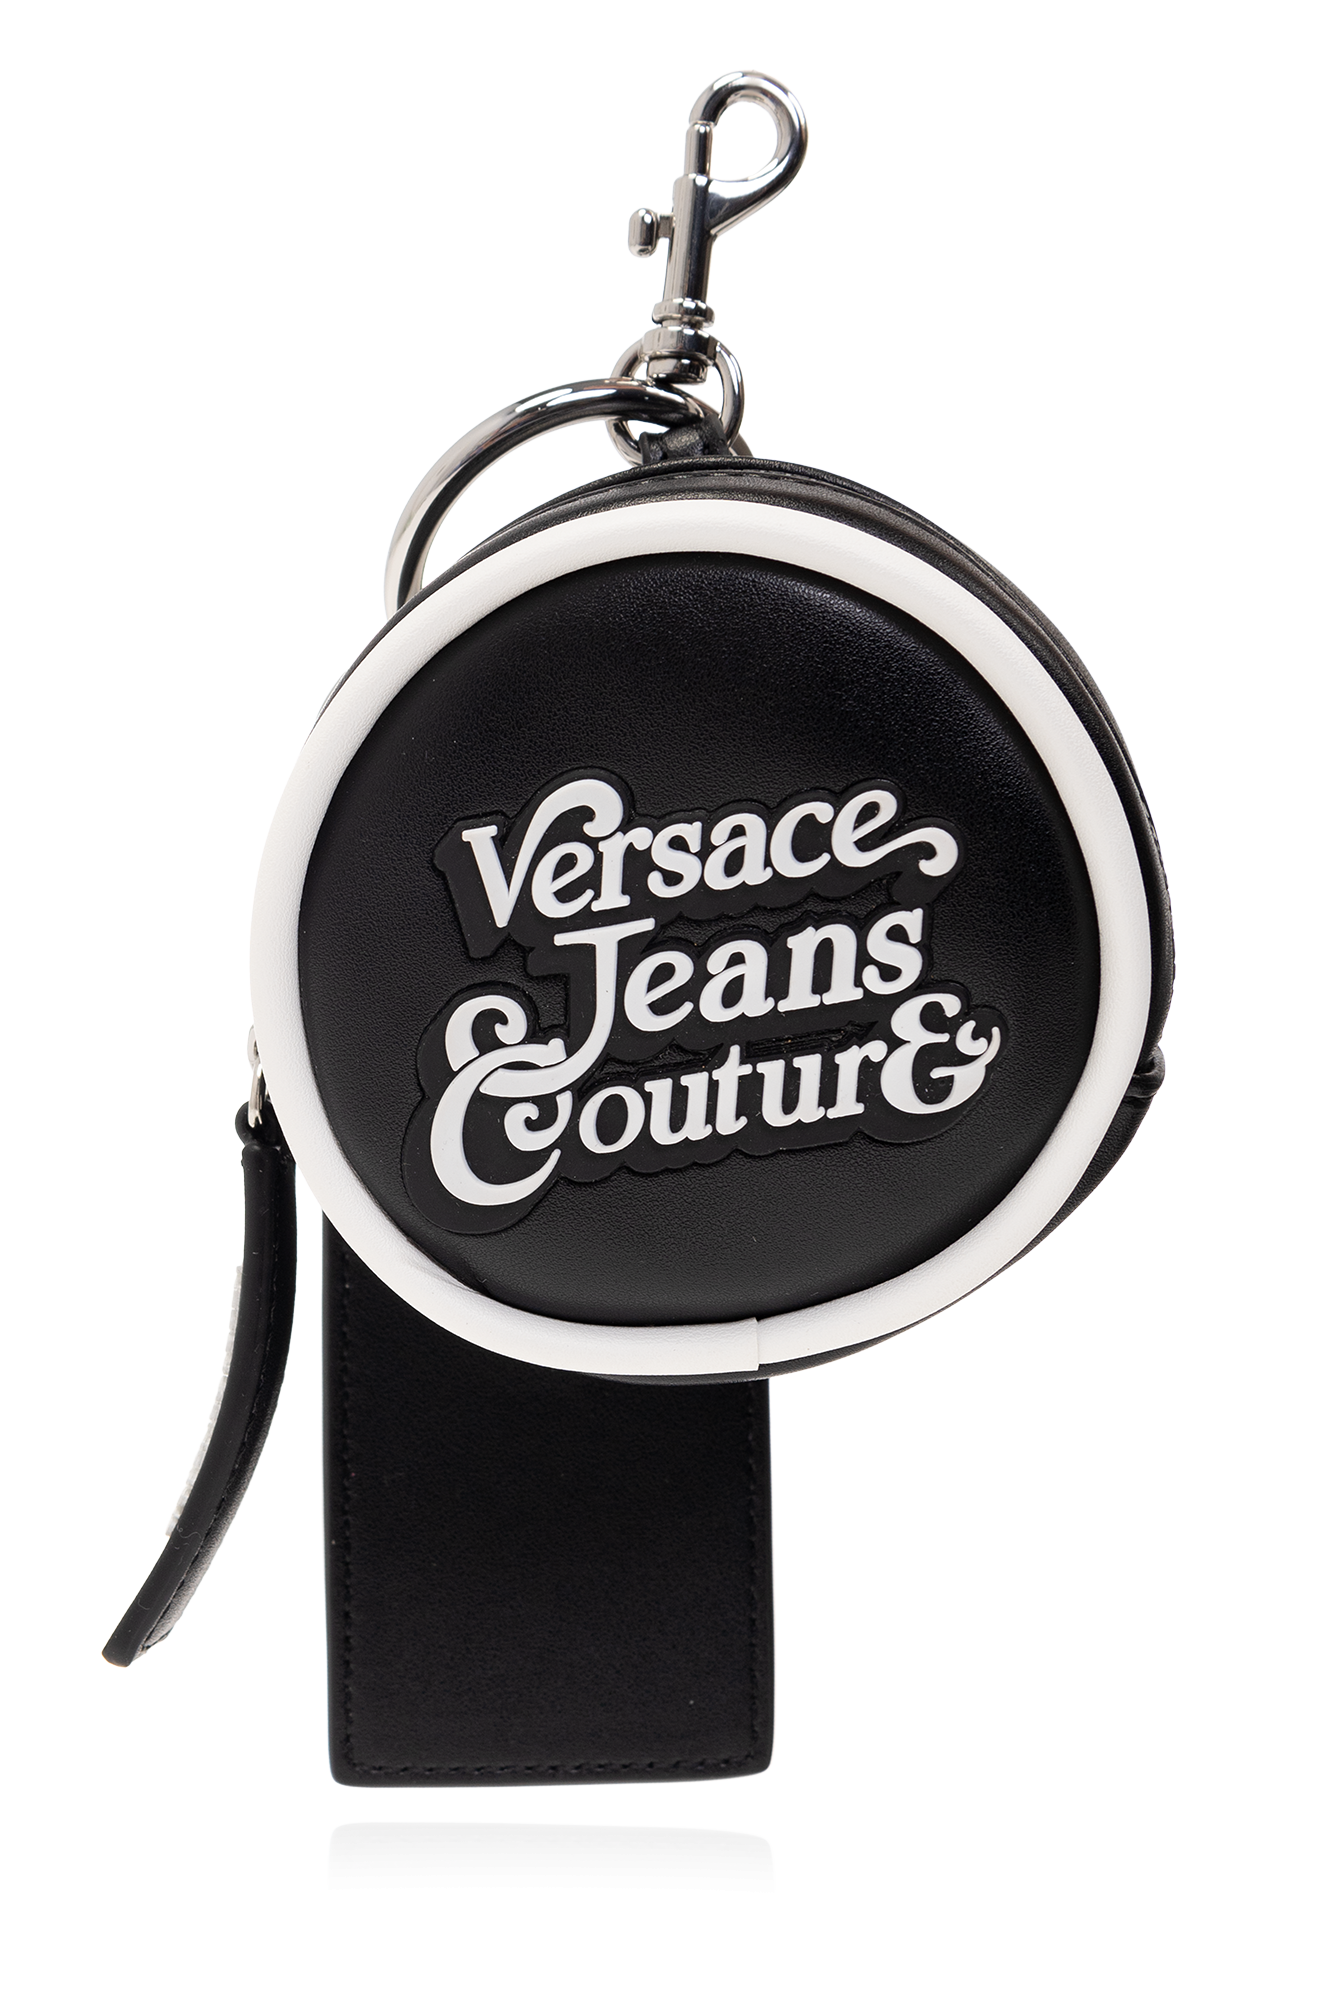 Versace Jeans Couture Keyring with pouch | Women's Accessories | Vitkac